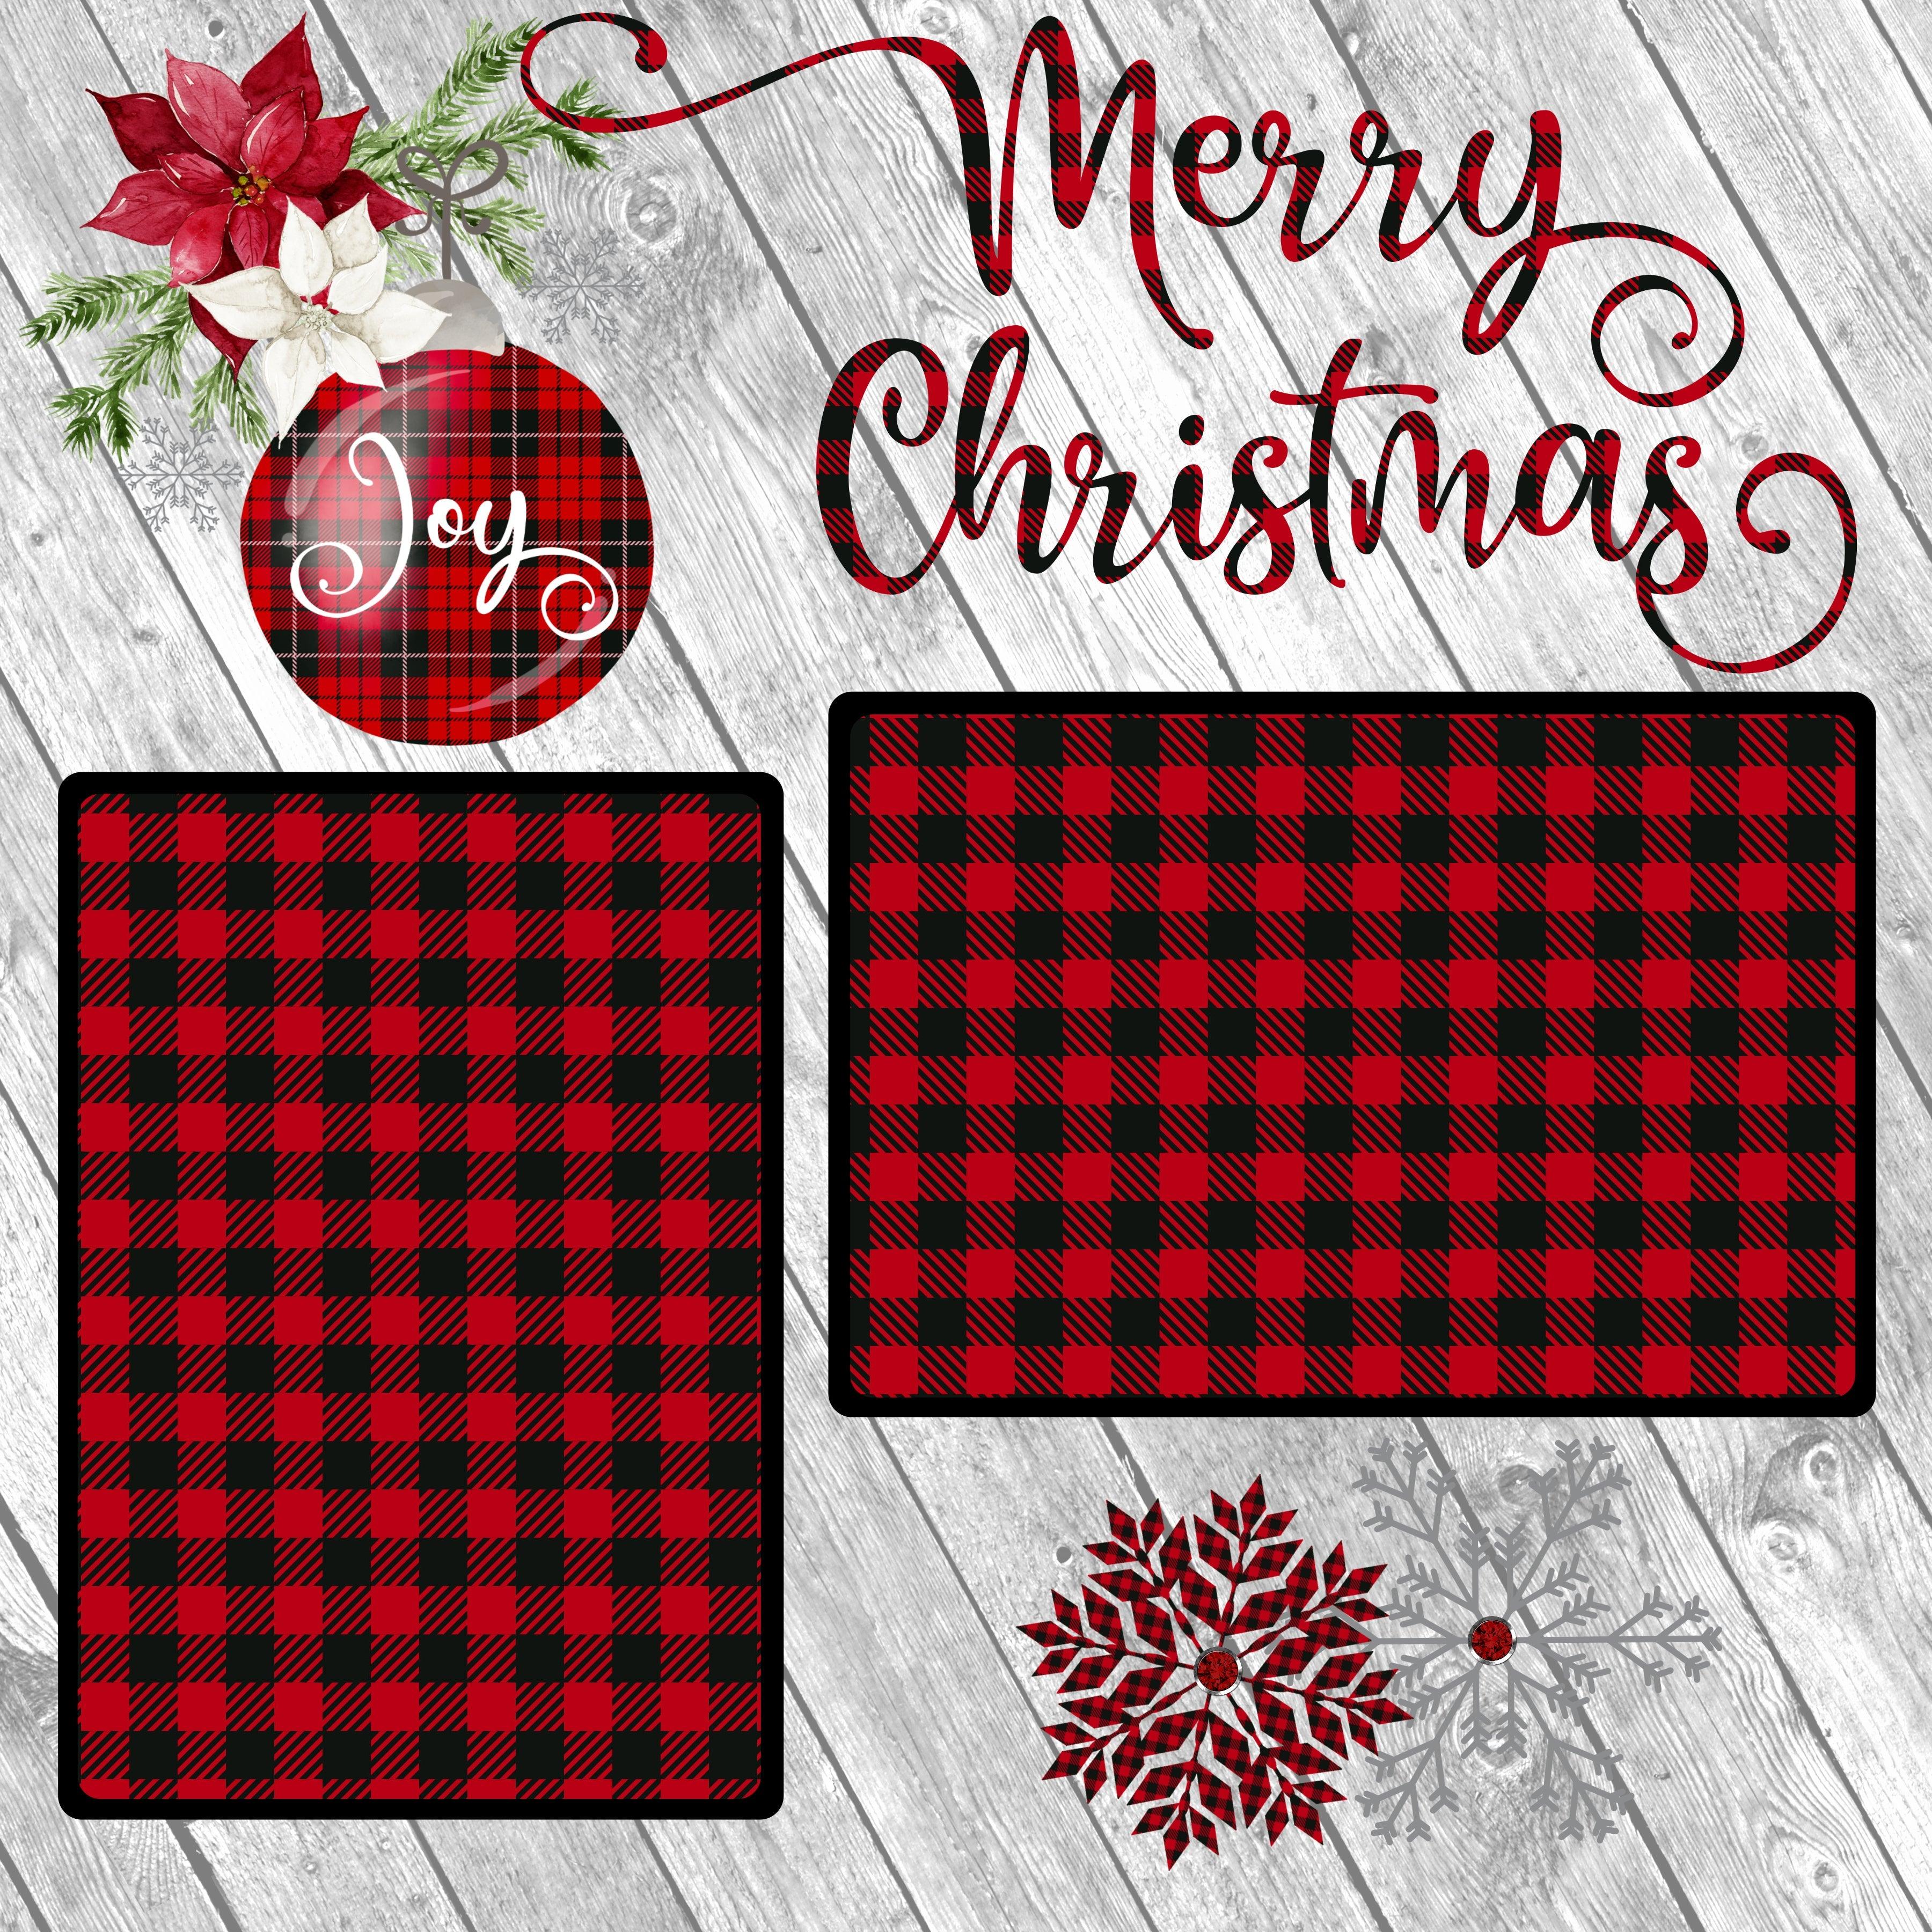 Buffalo Plaid Christmas (2) - 12 x 12 Premade, Printed Scrapbook Pages by SSC Designs - Scrapbook Supply Companies